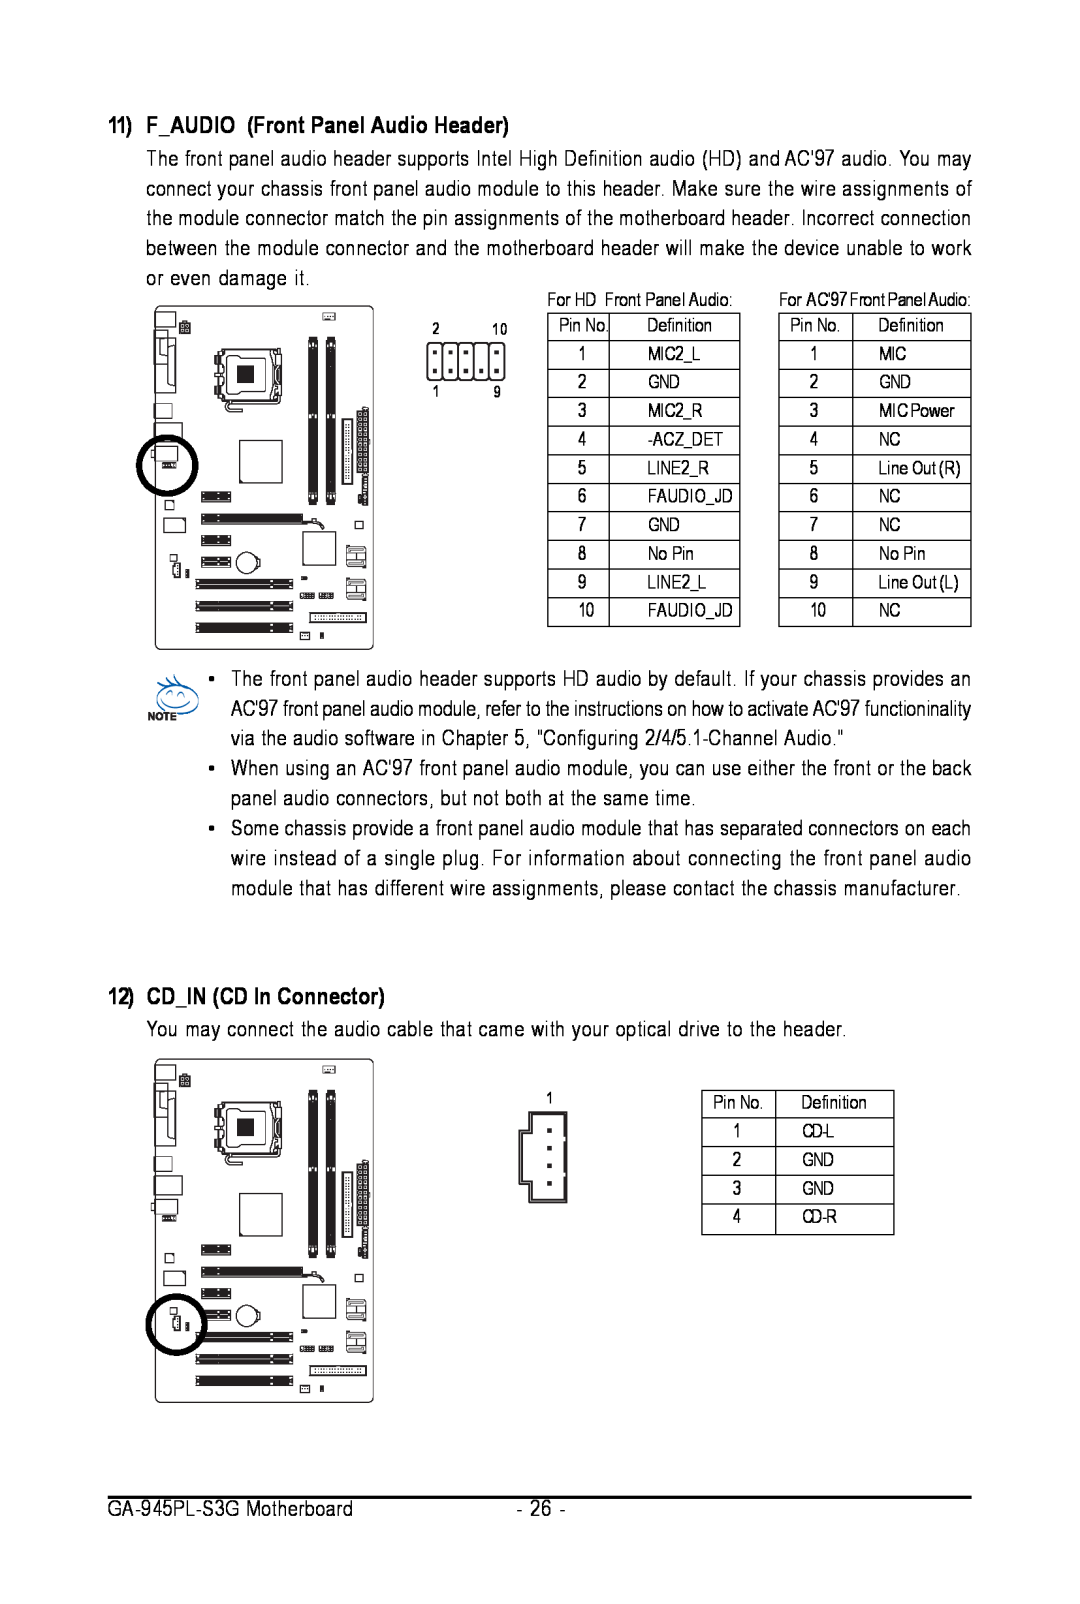 Intel GA-945PL-S3G user manual 11F_AUDIO Front Panel Audio Header, 12CD_IN CD In Connector 